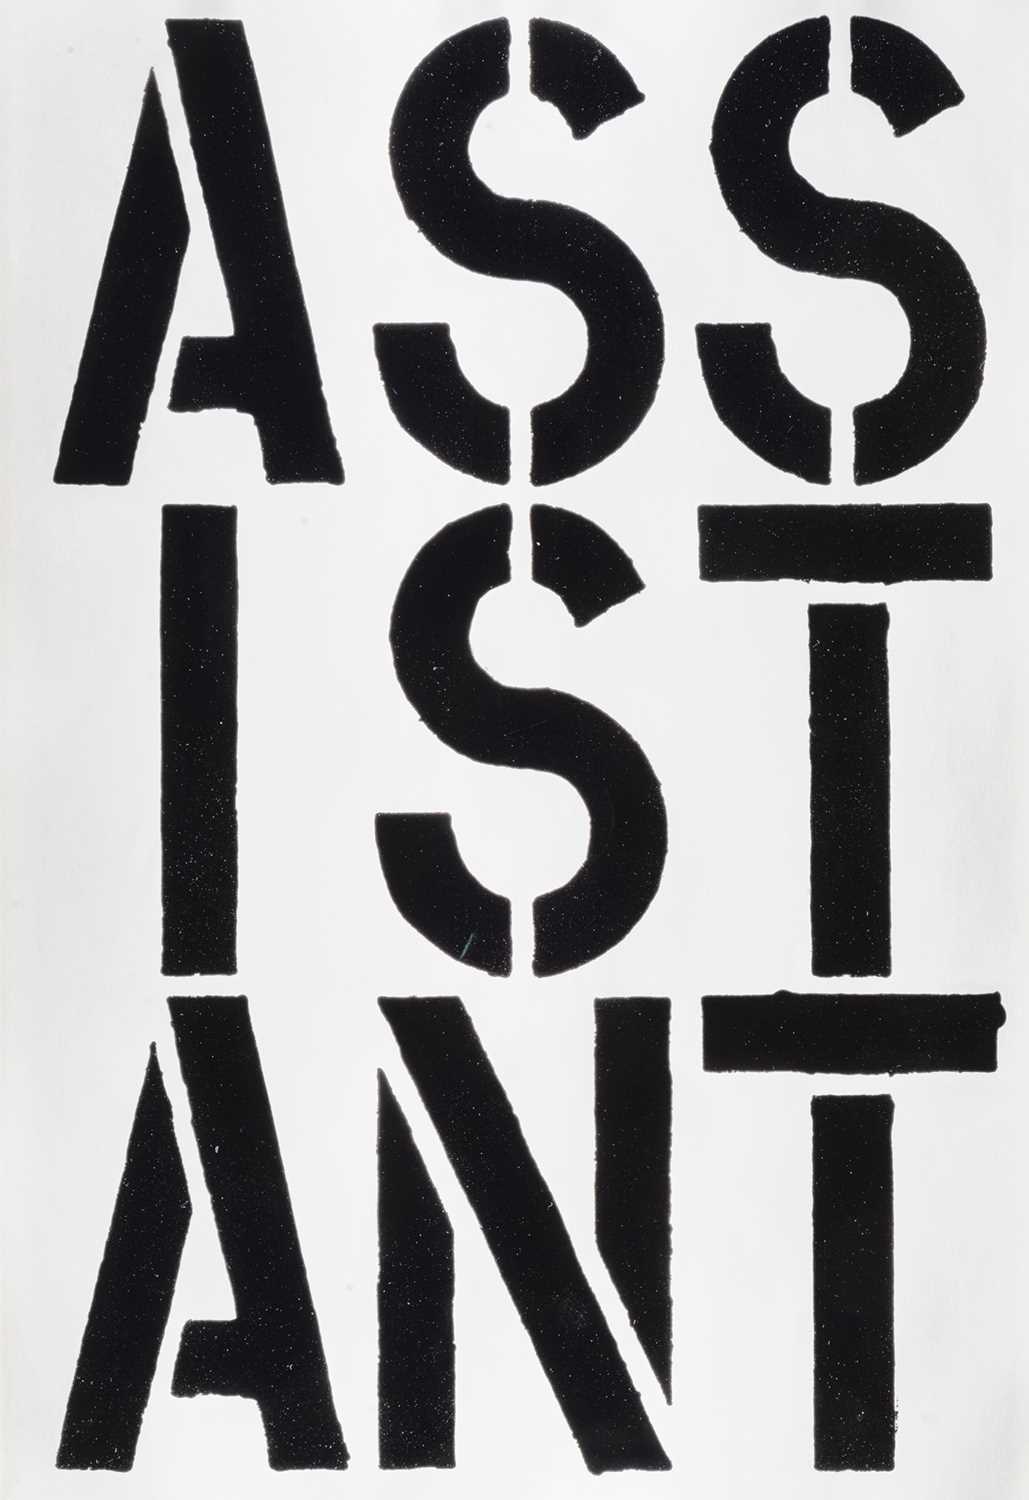 Lot 10 - Christopher Wool (American 1955-), 'Assistant, from Black Book', 1989